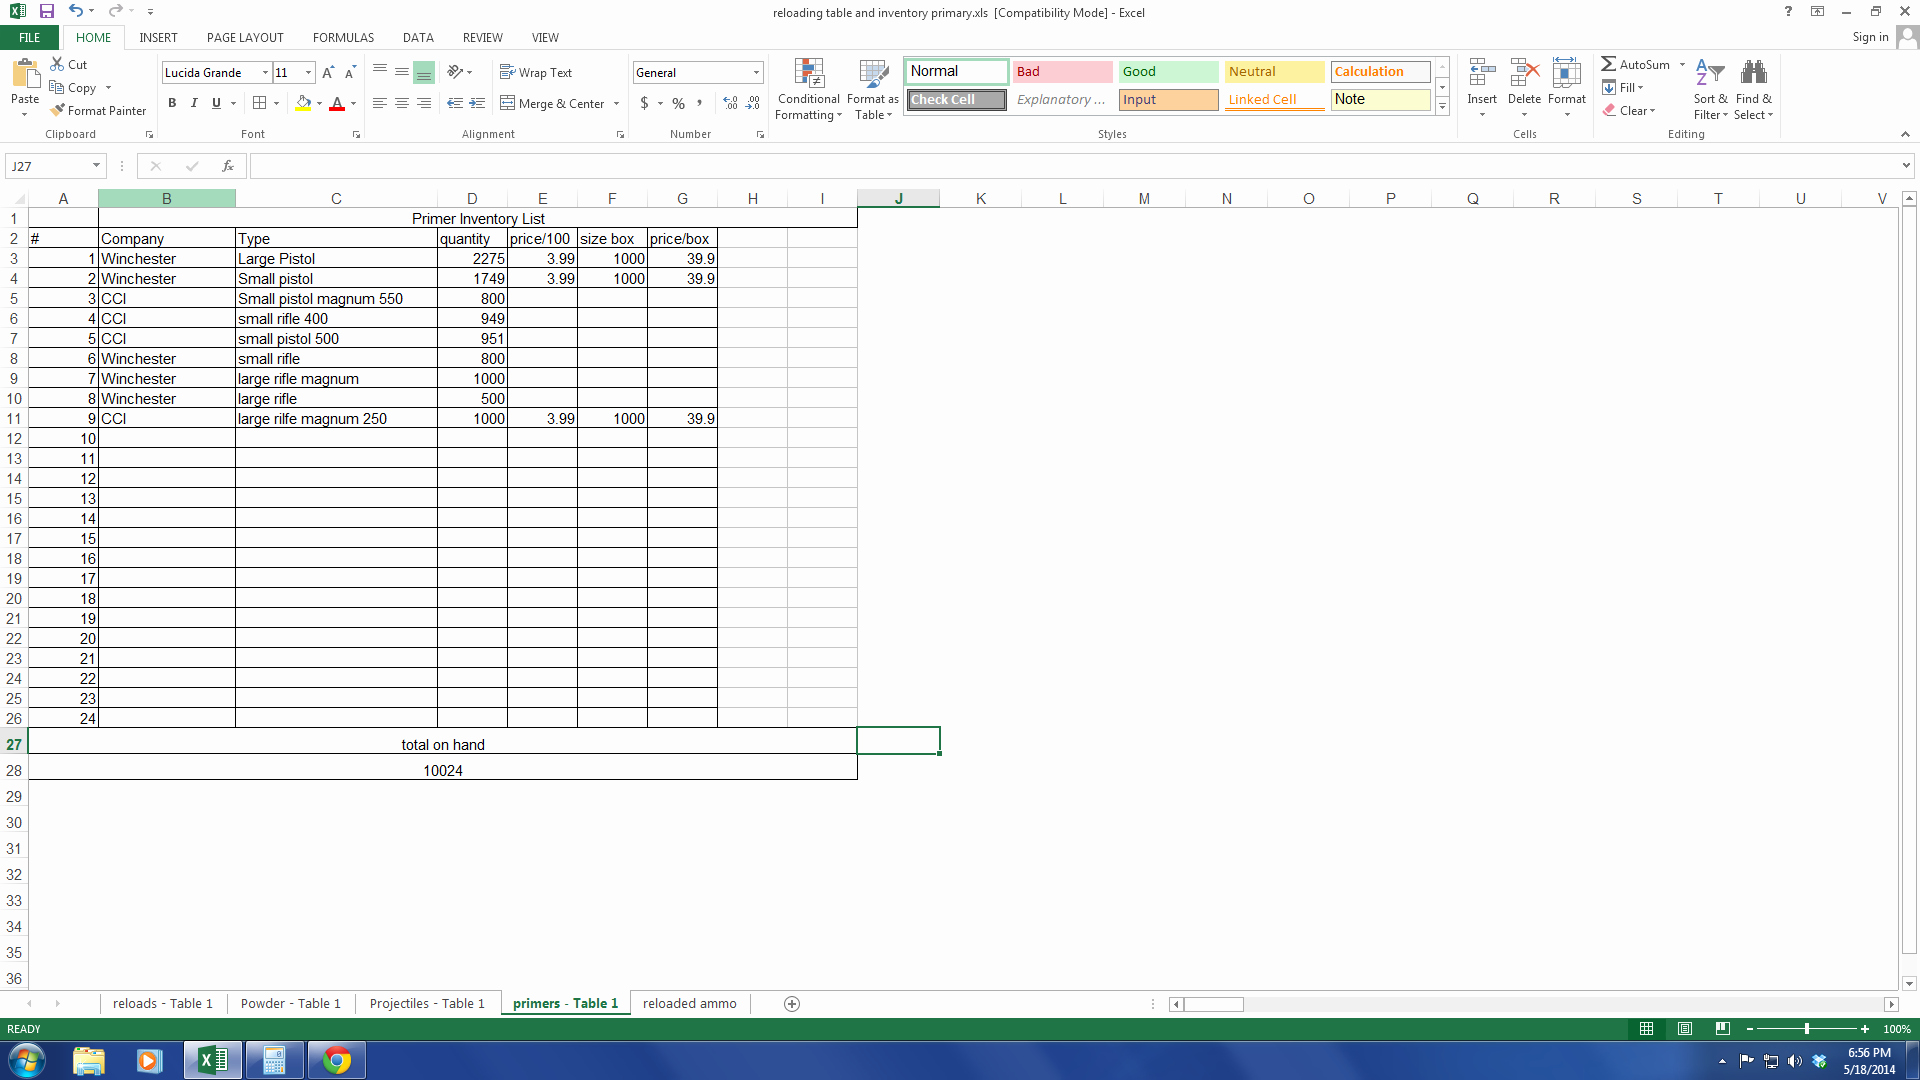 Excel Inventory Tracking Template Luxury Inventory Tracking with Excel Shooters forum